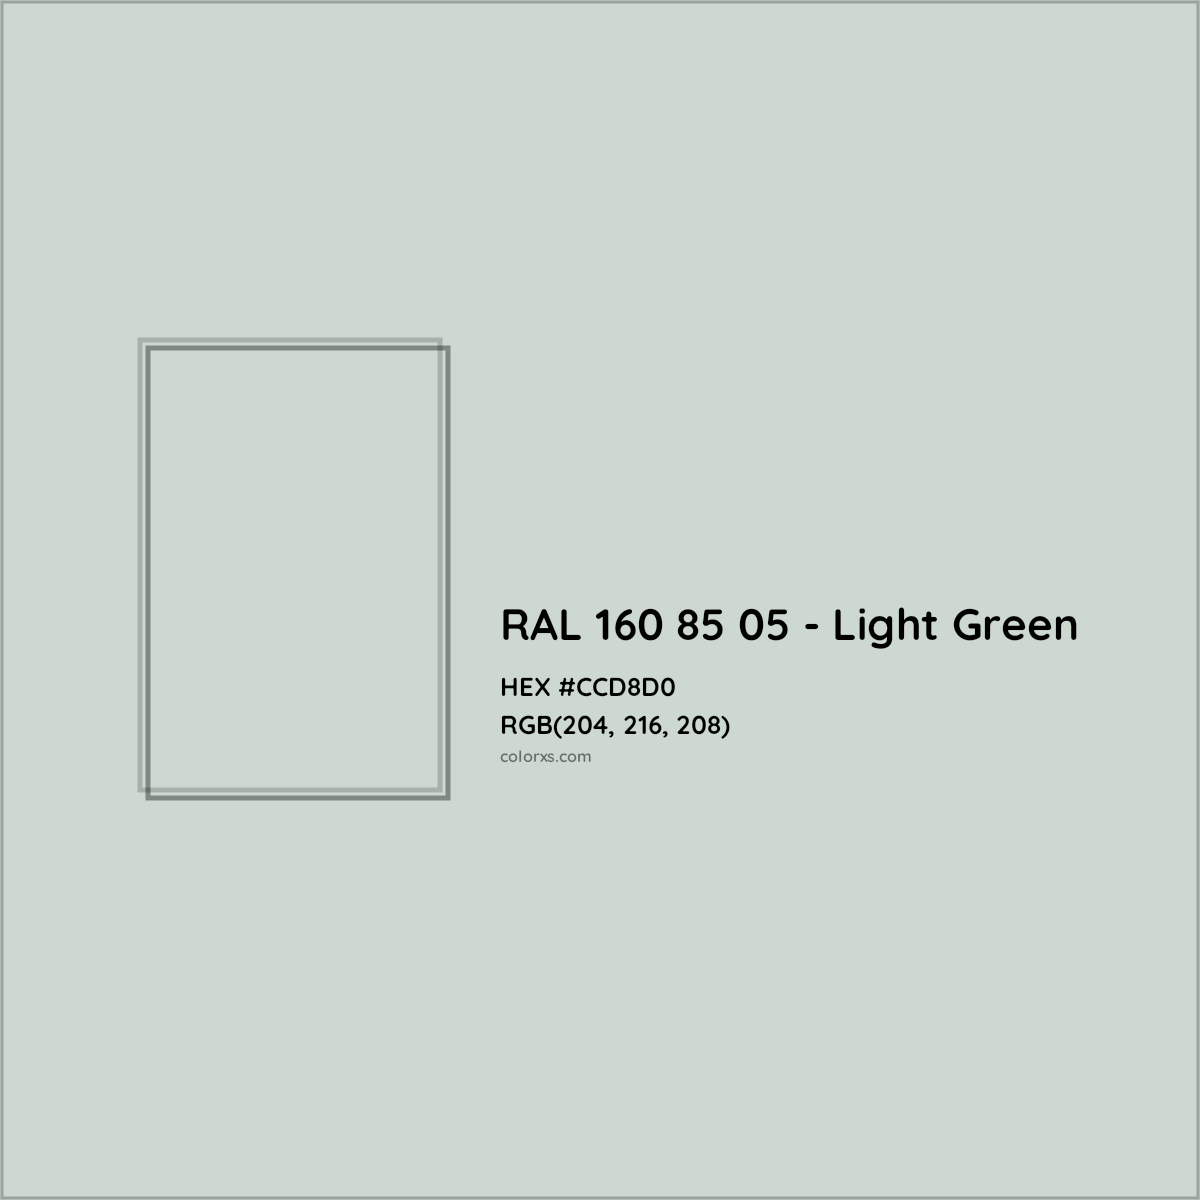 HEX #CCD8D0 RAL 160 85 05 - Light Green CMS RAL Design - Color Code